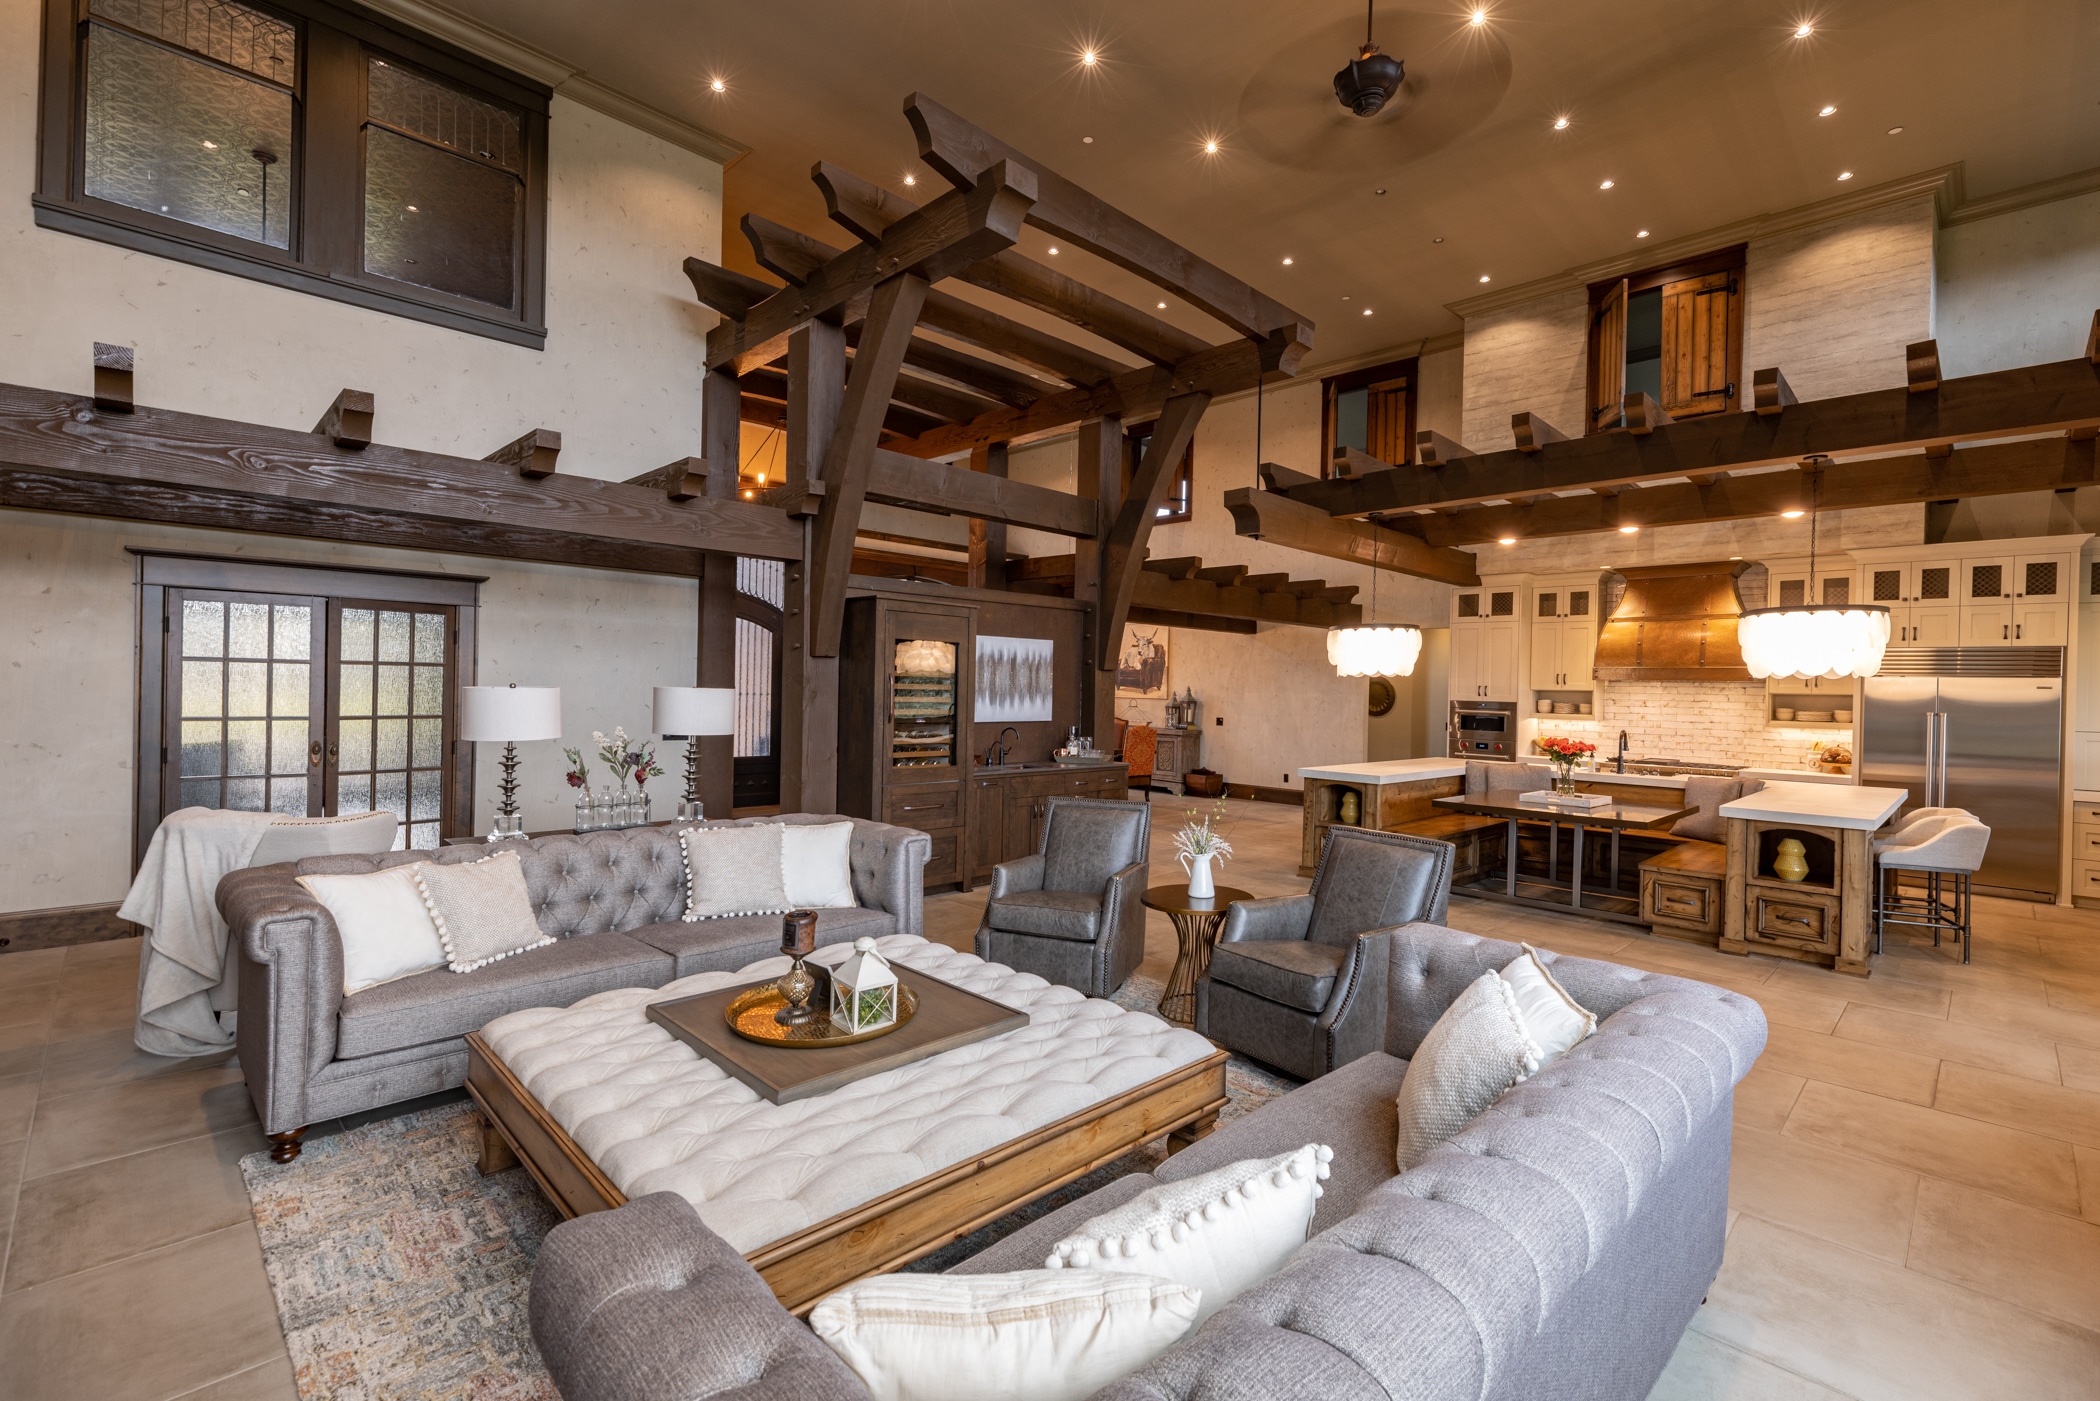 This hybrid timber frame home featured brick & timbers on the exterior. The inside of this home is most unique. With 25 foot high ceilings in the Great Room, the timbers create a ceiling feel without enclosing the space. More brick is also featured on the fireplace. The timbers have a darker stain that contrasts against the white walls. Most noteworthy is the door selection, which are all selected from older buildings. Each door was chosen before the floor plans were complete. Even doors from a rodeo were incorporated into the main area of this home. The timber package is a hybrid timber frame kit explicitly designed for this floor plan. Enjoy the distinctive design and look of this gorgeous Mediterranean Hybrid Timber Frame Home.